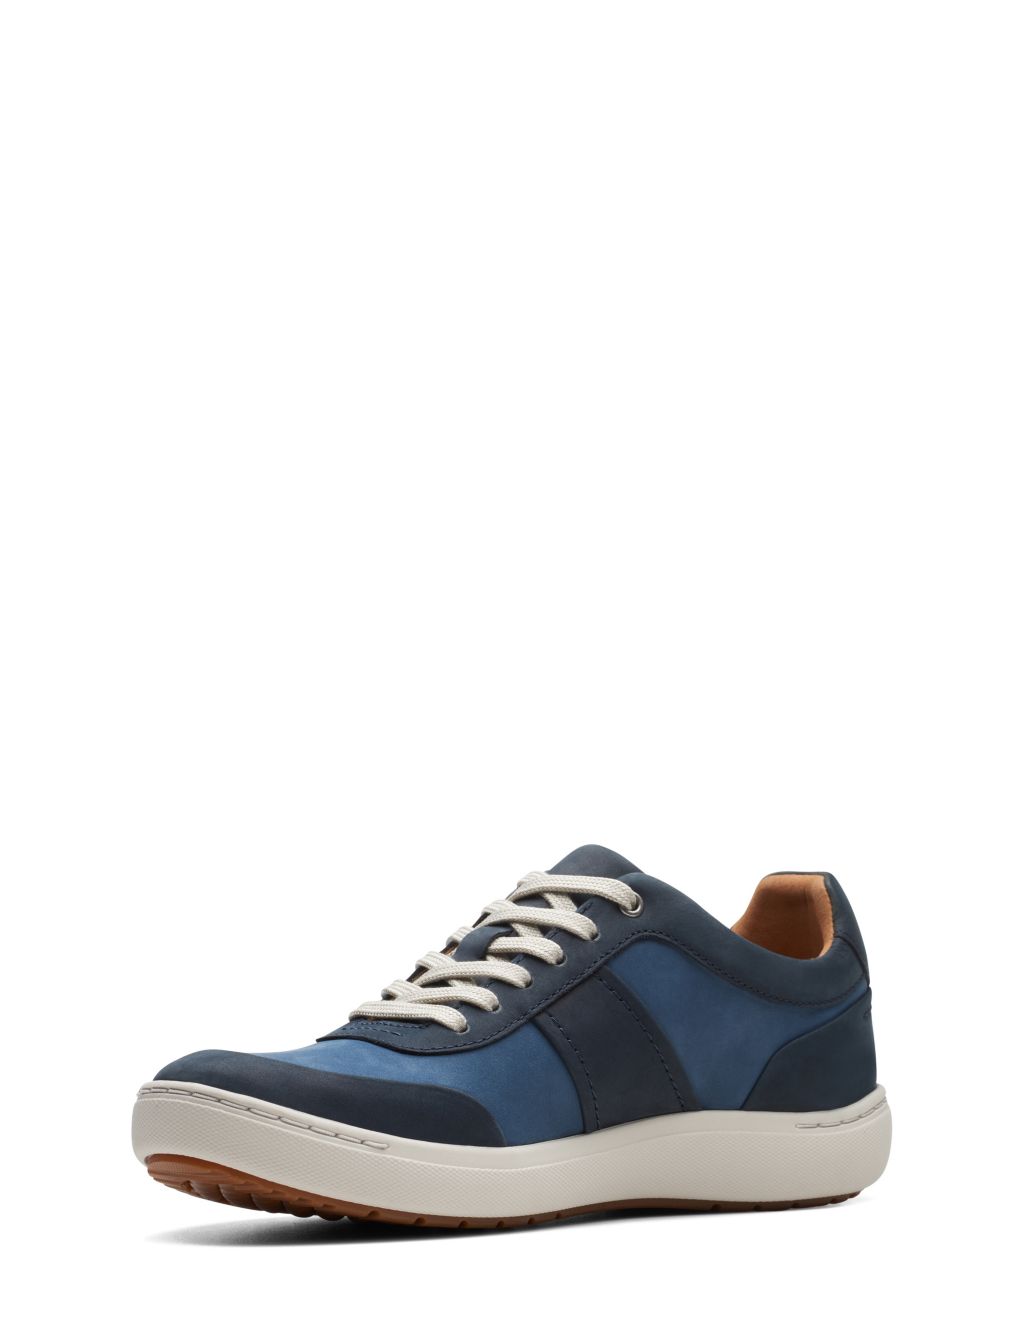 Leather Lace Up Colour Block Trainers image 4